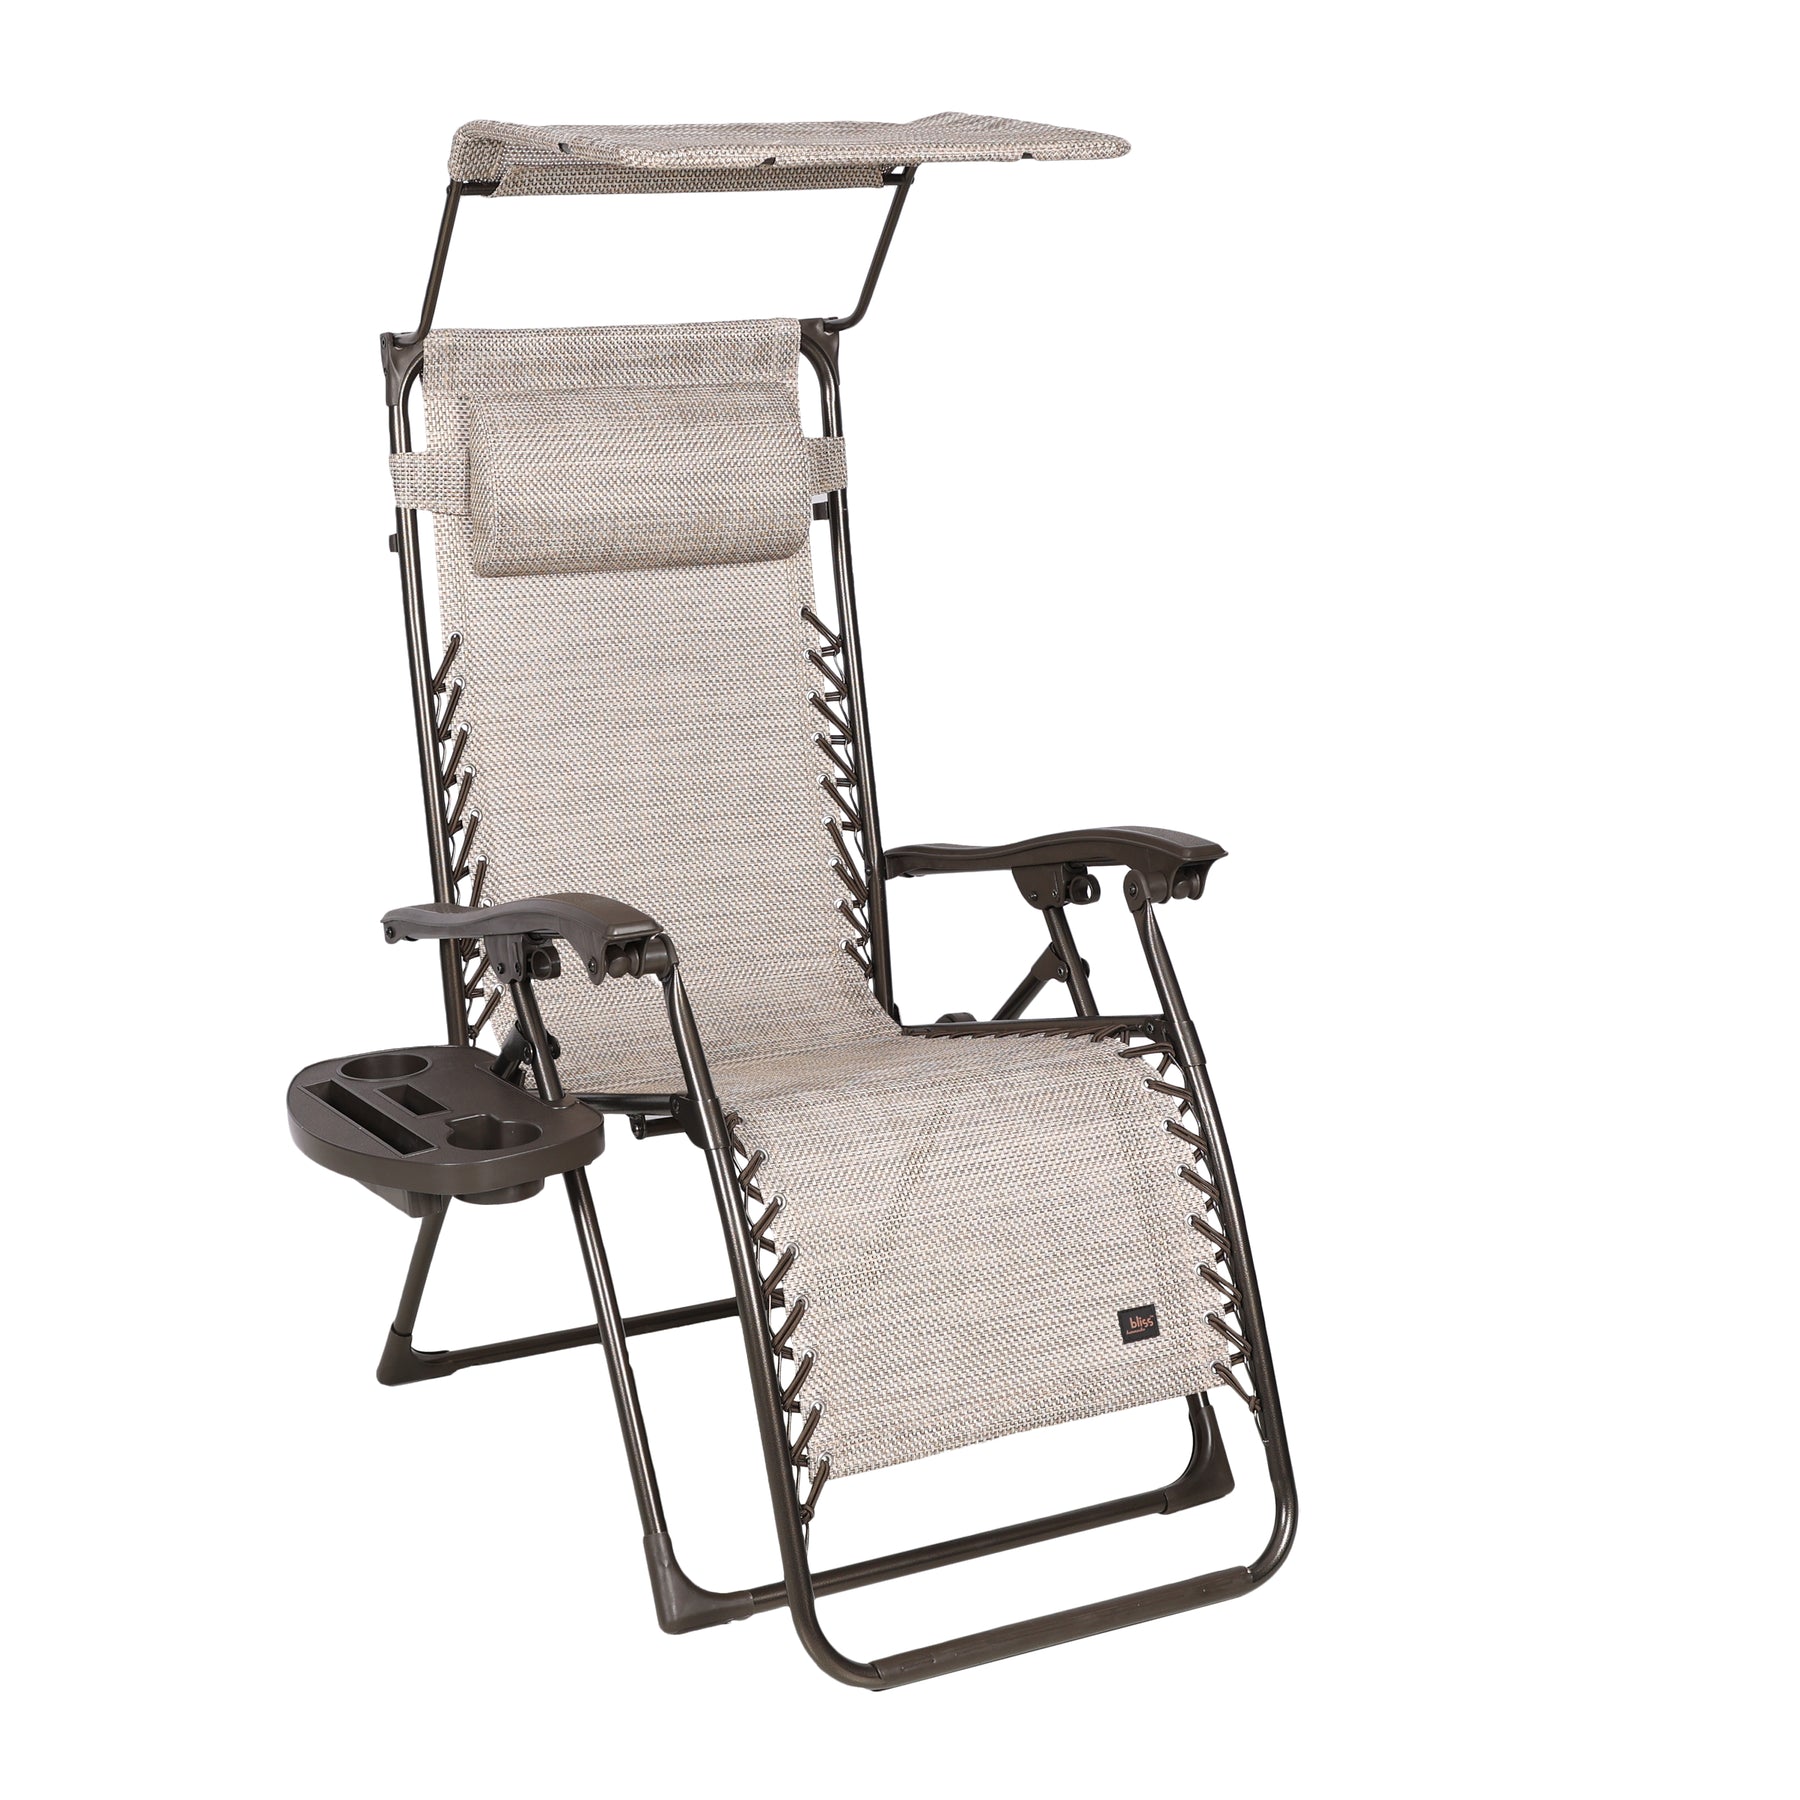 Bliss Hammocks 26-inch Wide Zero Gravity Chair with Canopy, Pillow, and Drink Tray in the sand variation.